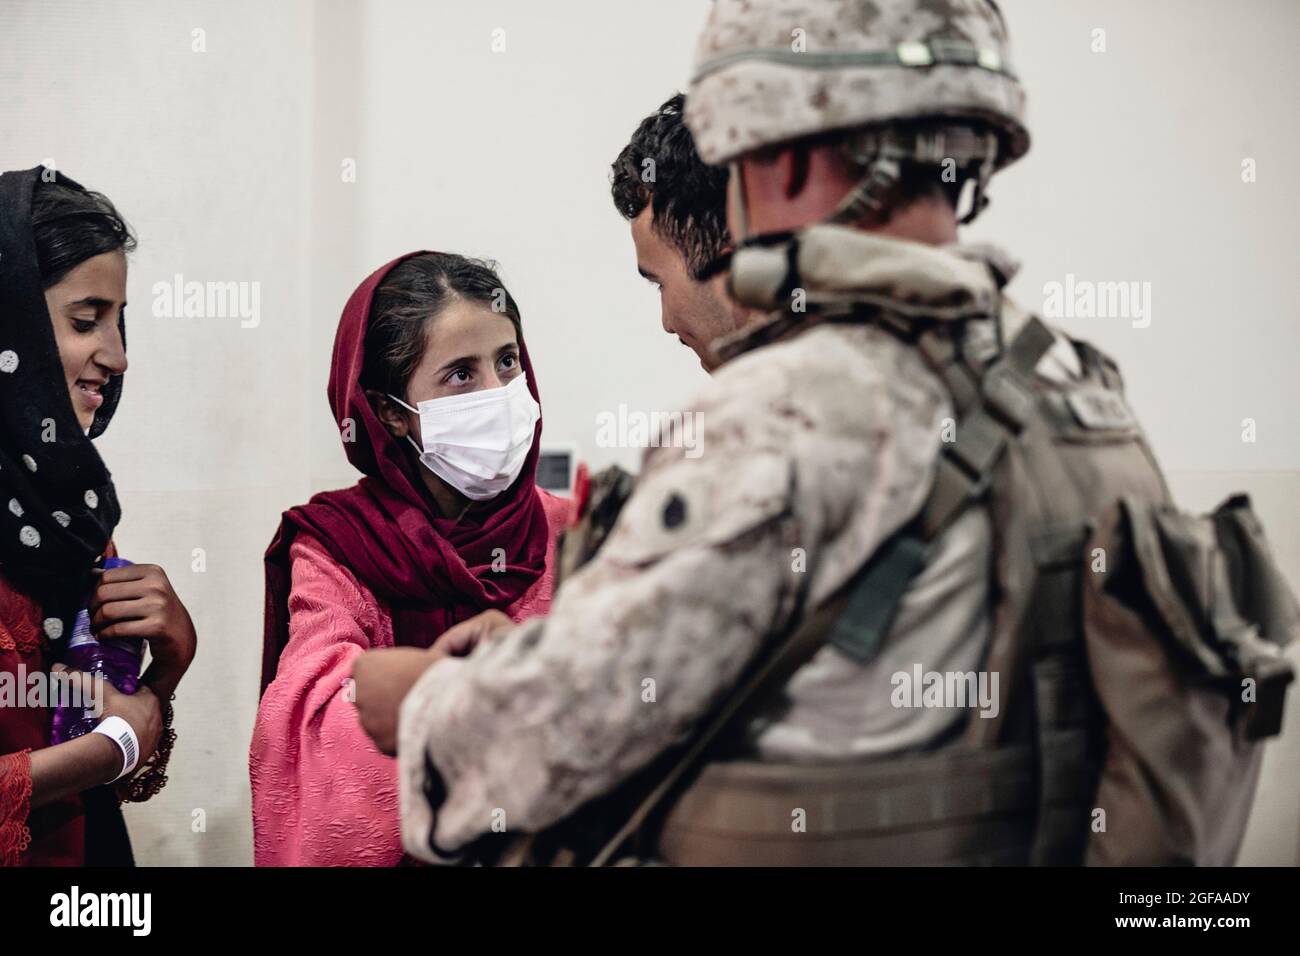 Kabul, Afghanistan. 24th Aug, 2021. A U.S. Marine assigned to Special Purpose Marine Air-Ground Task Force - Crisis Response team assists Afghan refugees at Hamid Karzai International Airport during Operation Allies Refuge August 24, 2021 in Kabul, Afghanistan. Credit: Planetpix/Alamy Live News Stock Photo